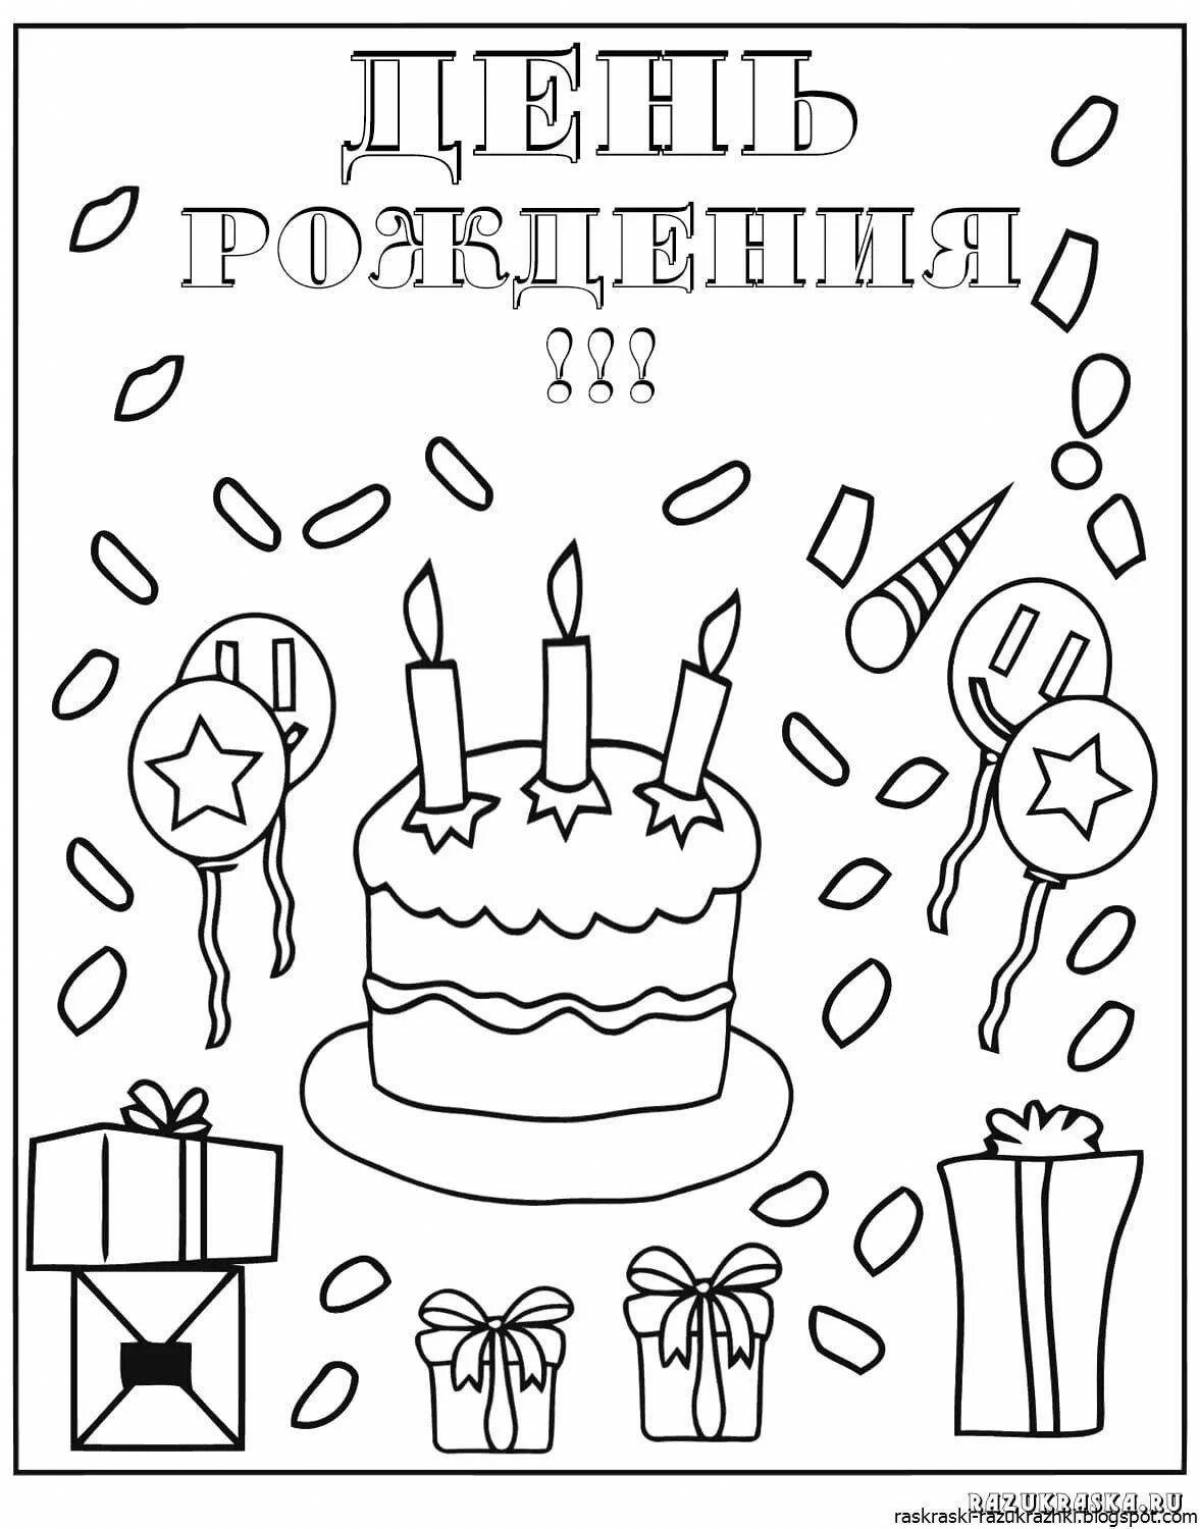 Joyful coloring page happy birthday grandfather from granddaughter